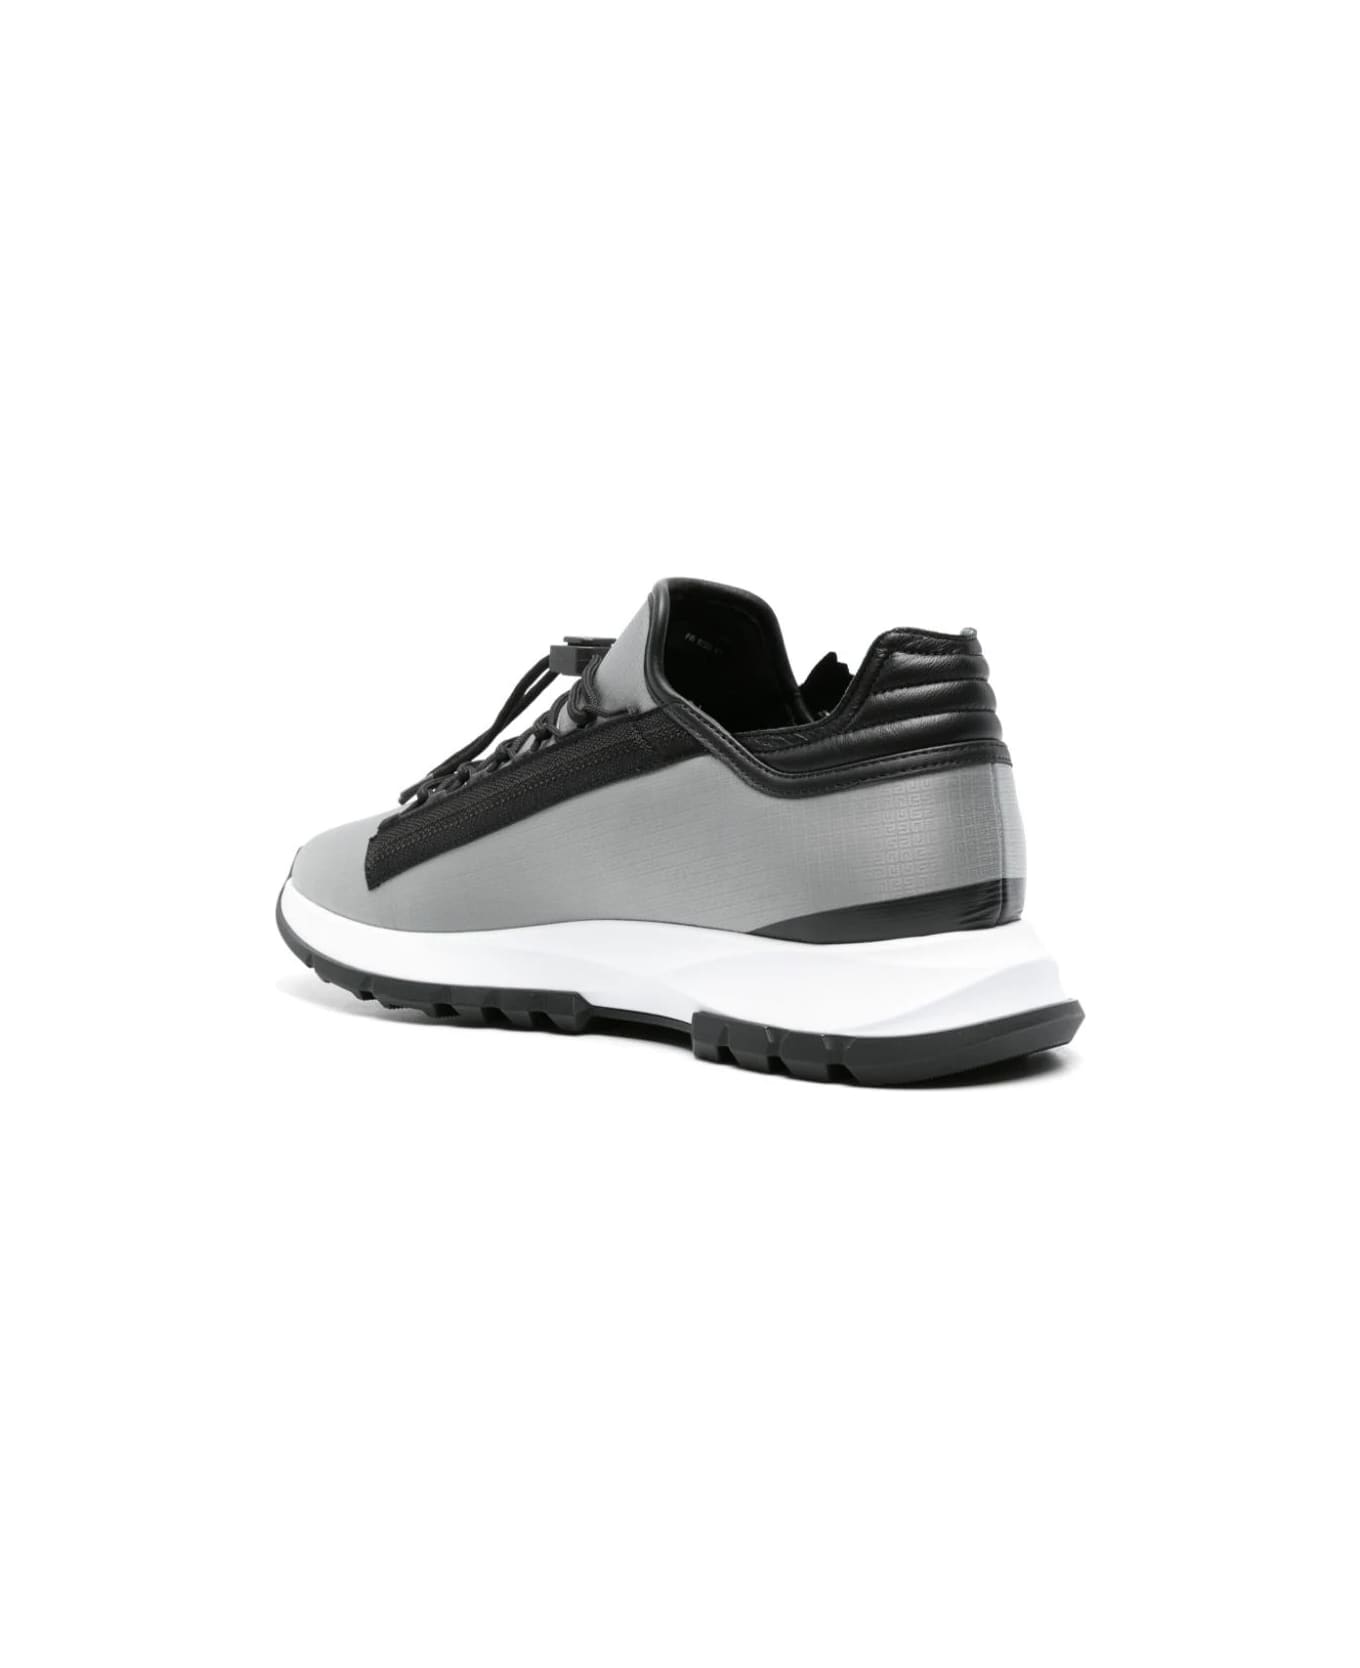 Givenchy Specter Running Sneakers In Black 4g Nylon With Zip - Grey